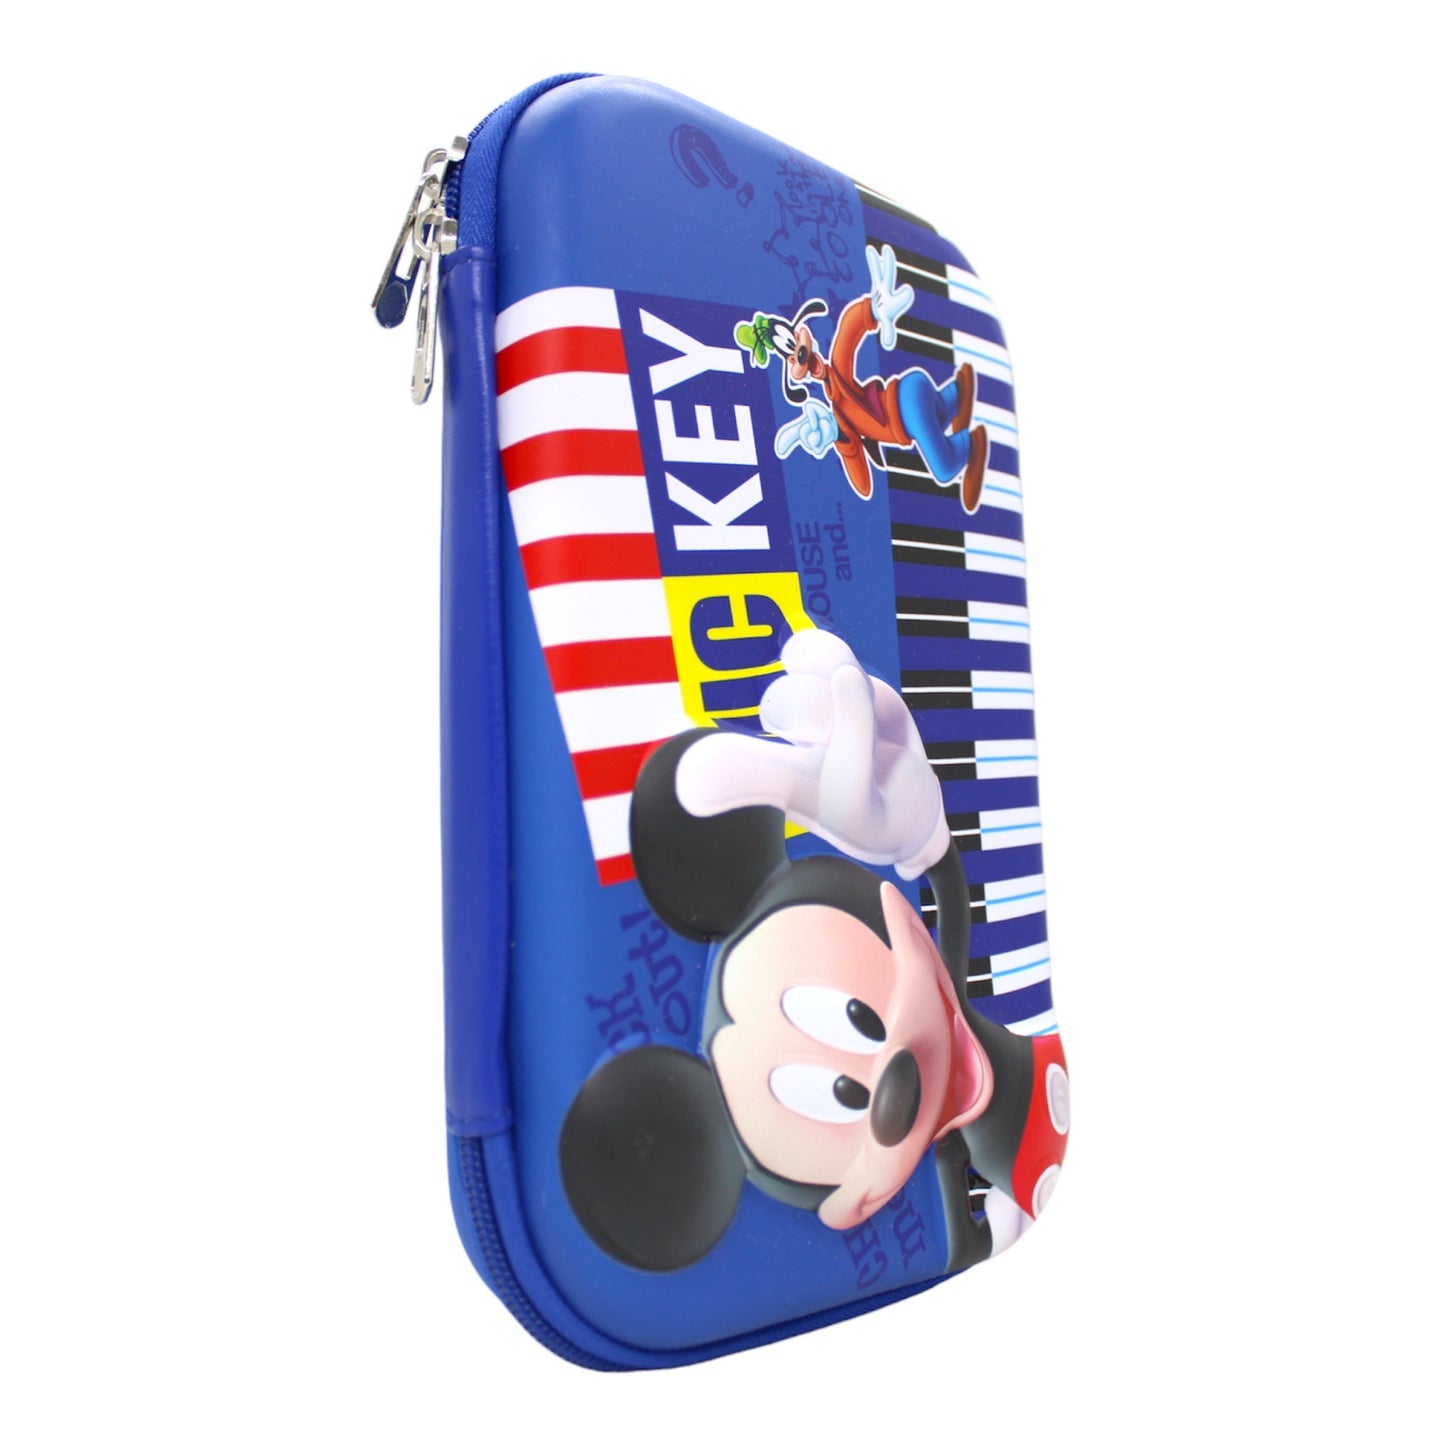 FOLKSBOXX 3D Embossed EVA Cover Pencil Case with Compartments, Pencil Pouch for Kids, School Supply Organizer for Students, Stationery Box, Cosmetic Zip Pouch Bag, Pencil Box, Wide range of cartoon character